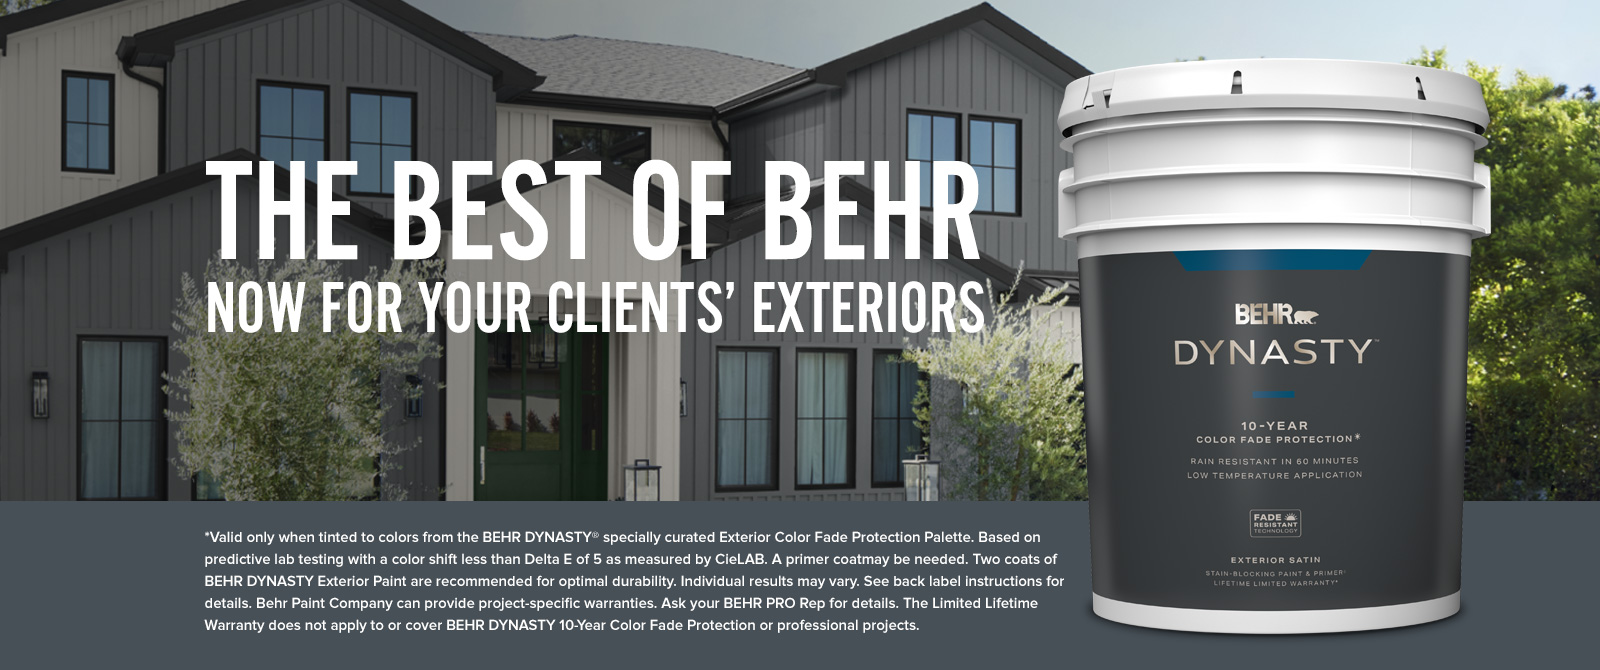 NEW BEHR DYNASTY - Clients Deserve Your Best, You deserve ours